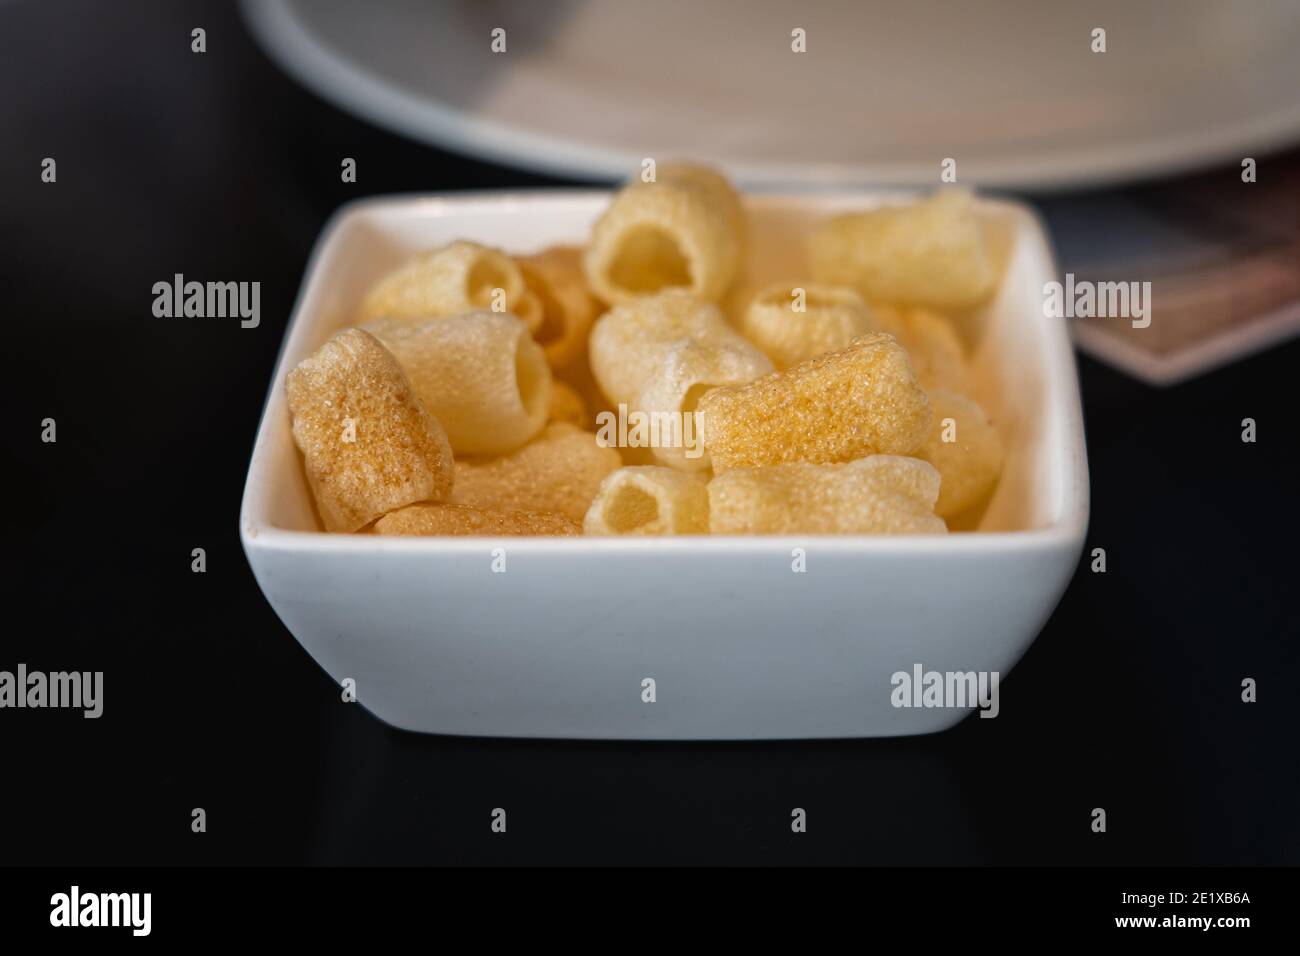 Fryums served in a small white bowl on a black table. A white plate in the background. Stock Photo